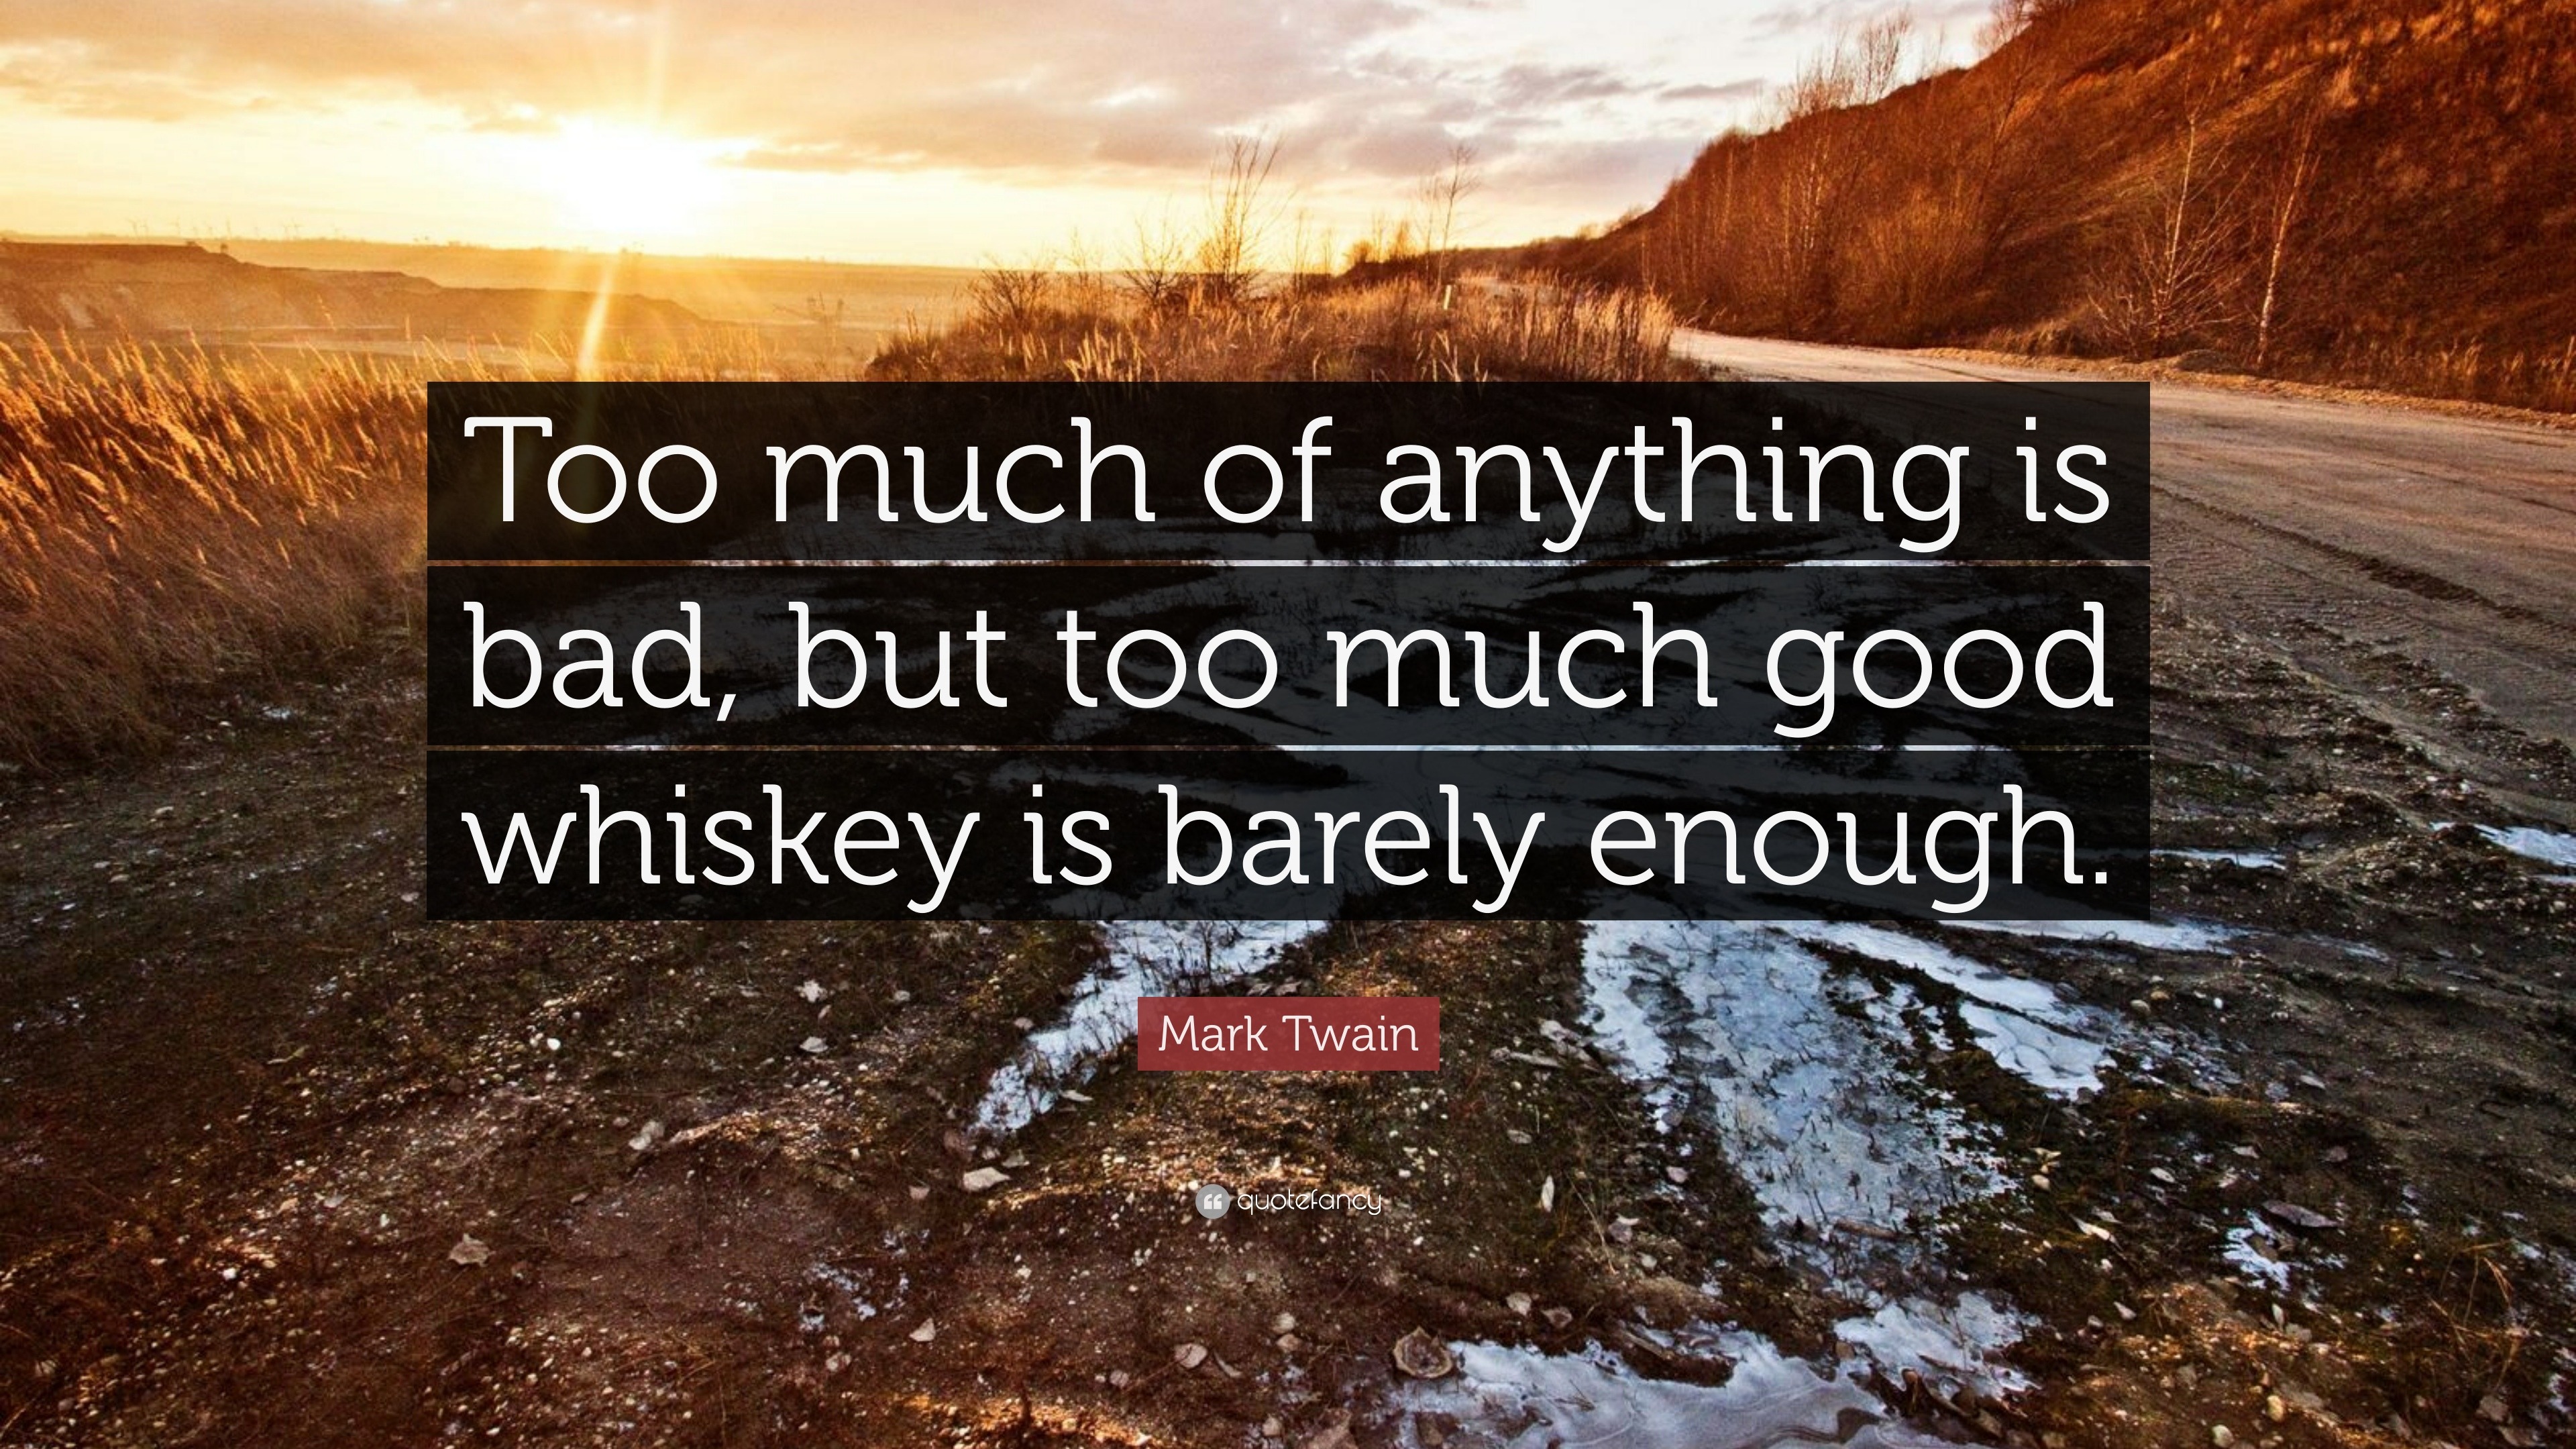 Mark Twain Quote Too Much Of Anything Is Bad But Too Much Good Whiskey Is Barely